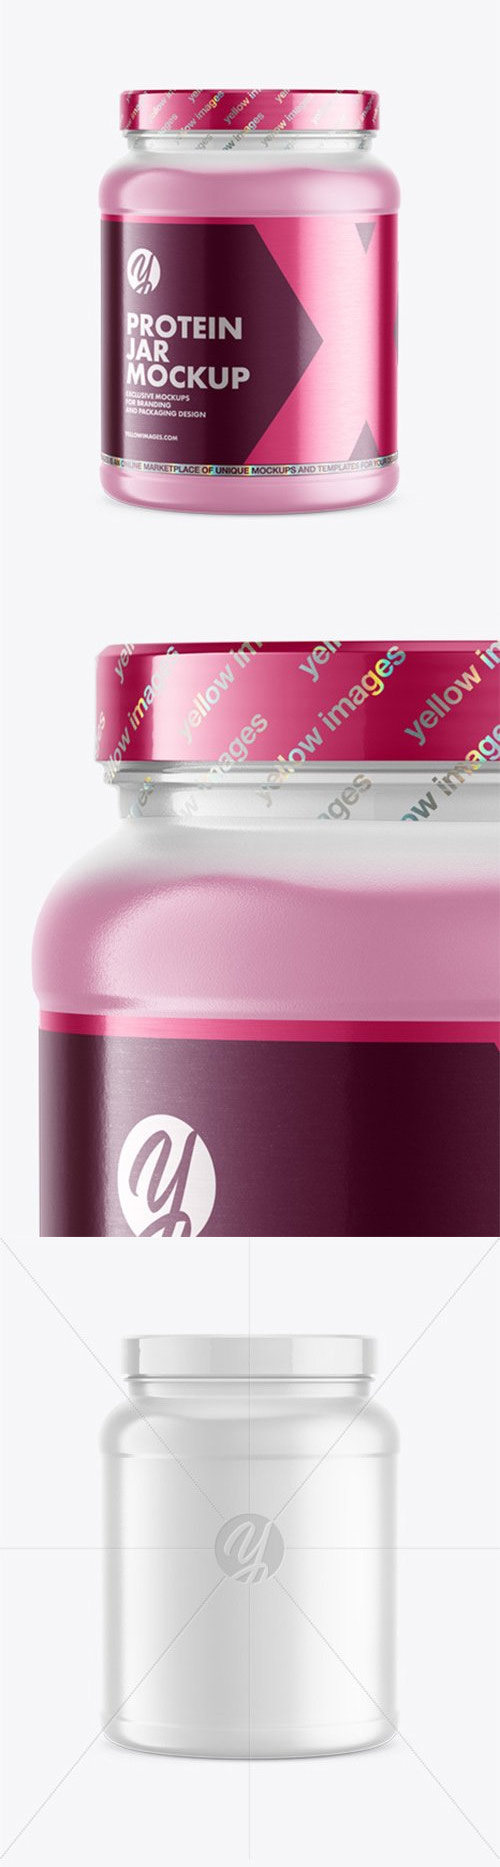 Frosted Protein Jar Mockup 82081